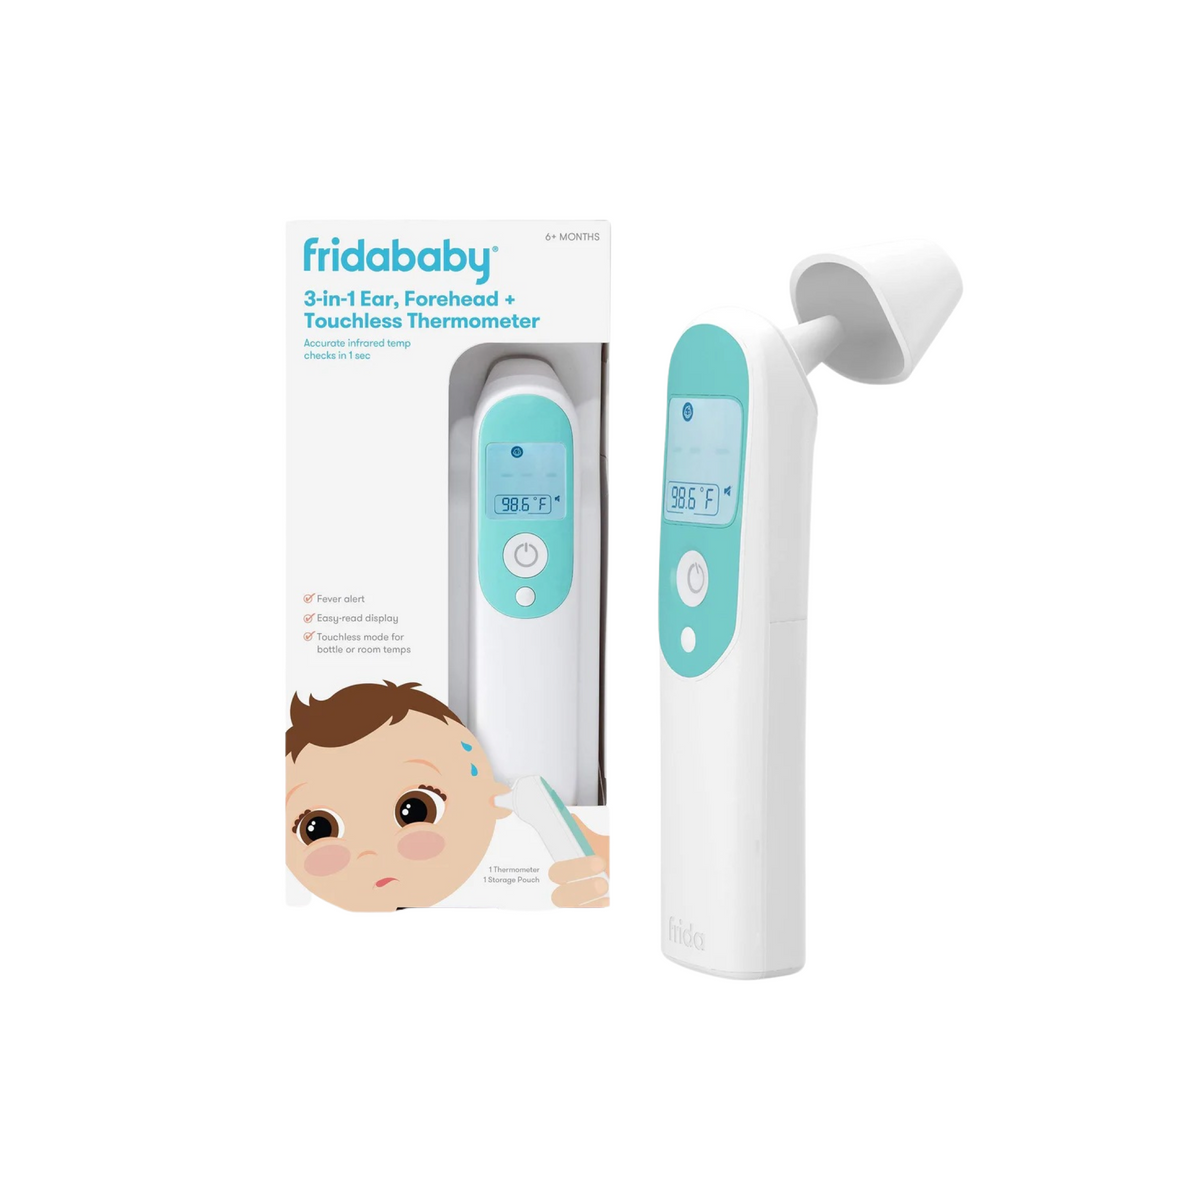 3-In-1 Forehead Touchless Thermometer